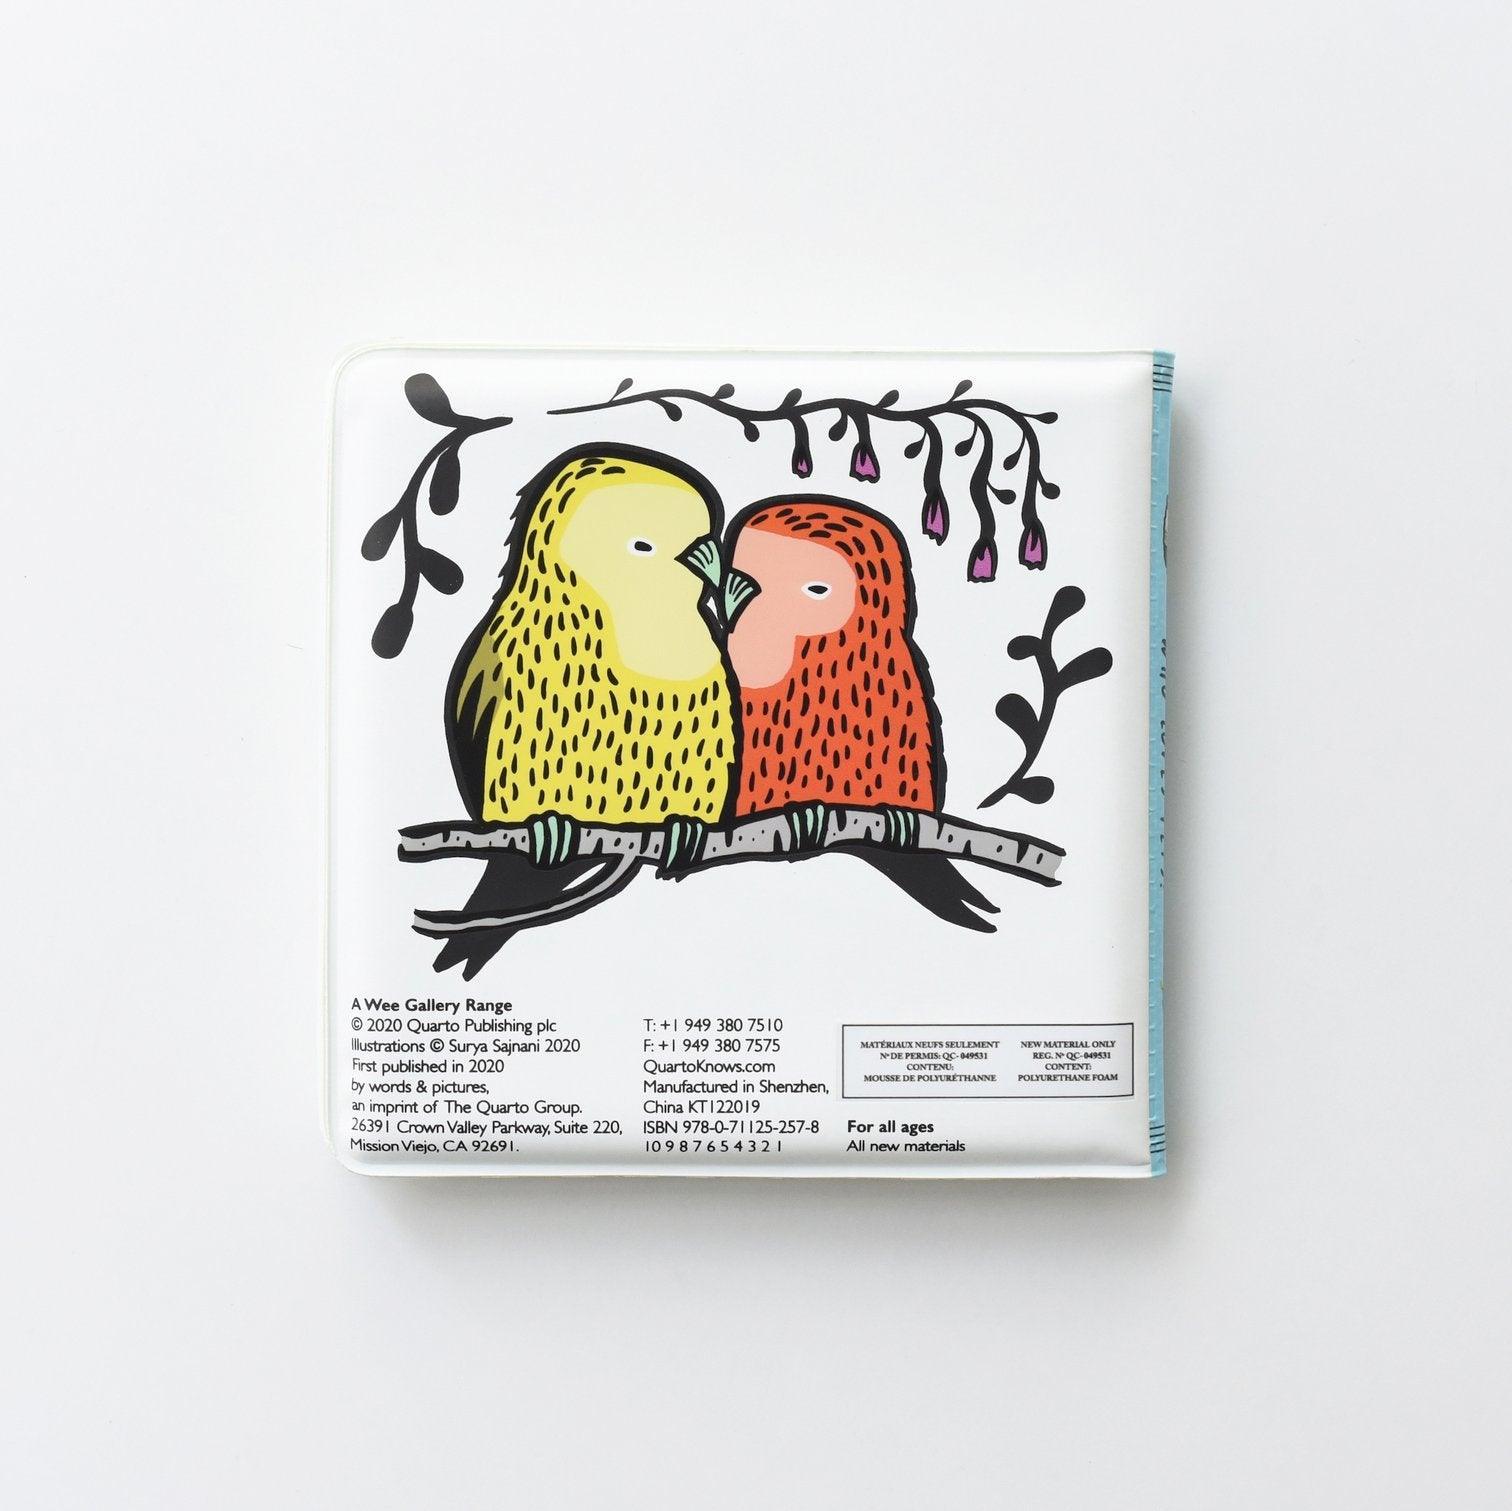 Color Me: Who Loves Pets? bath book - Why and Whale